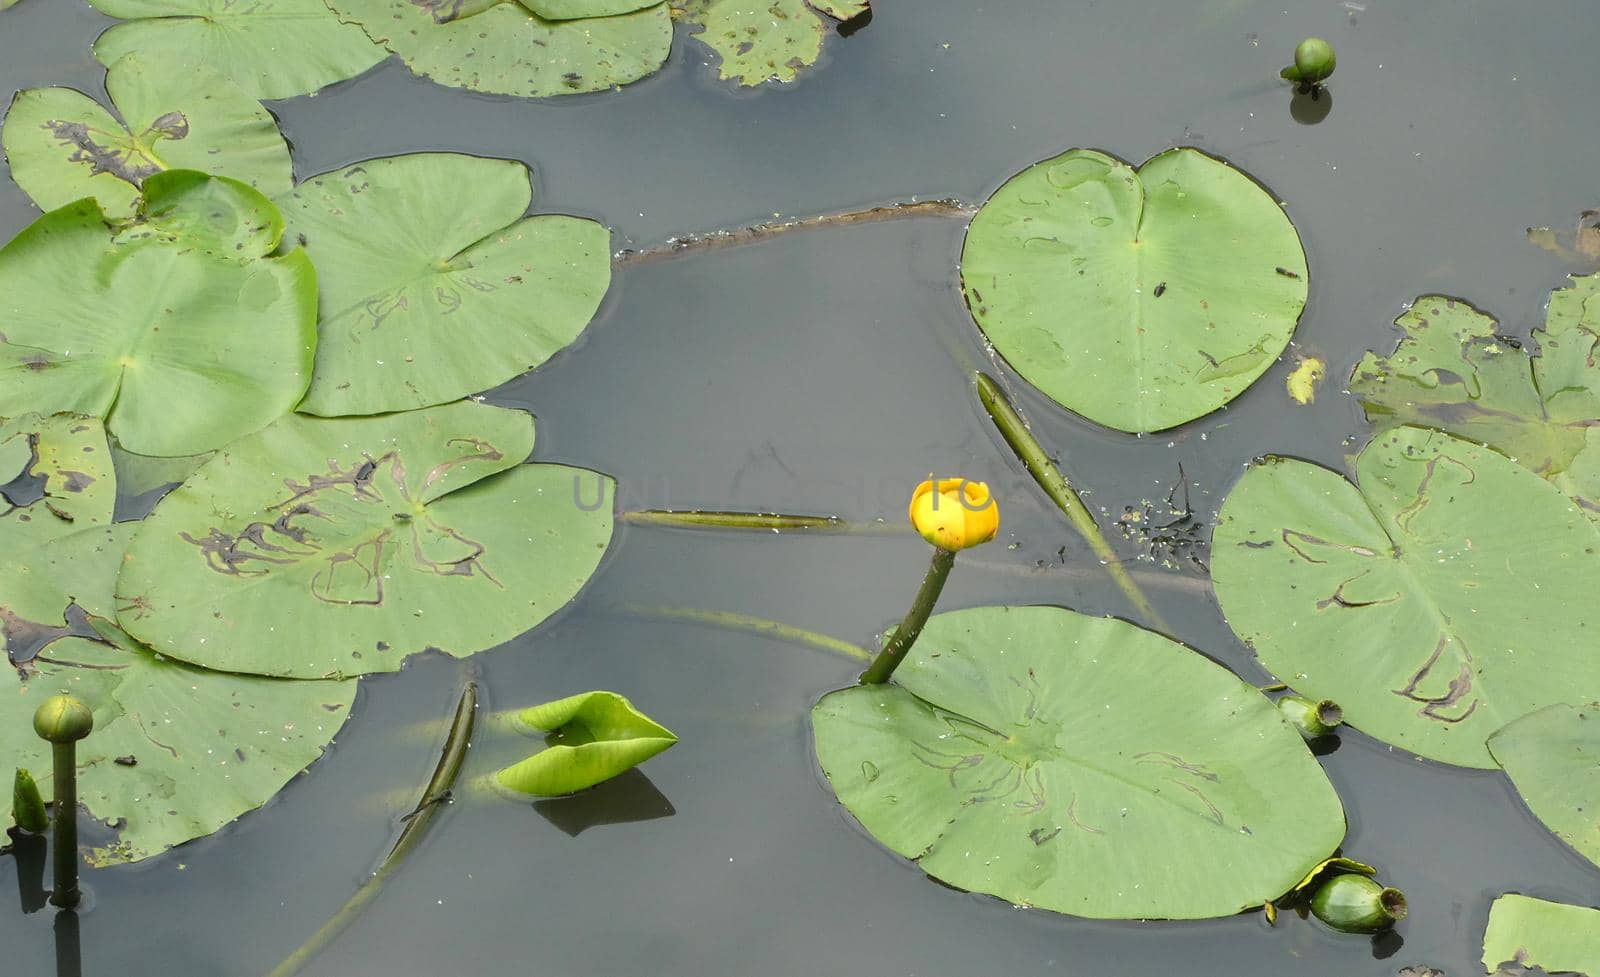 An aquatic plant with yellow flowers floats in dark water by WielandTeixeira